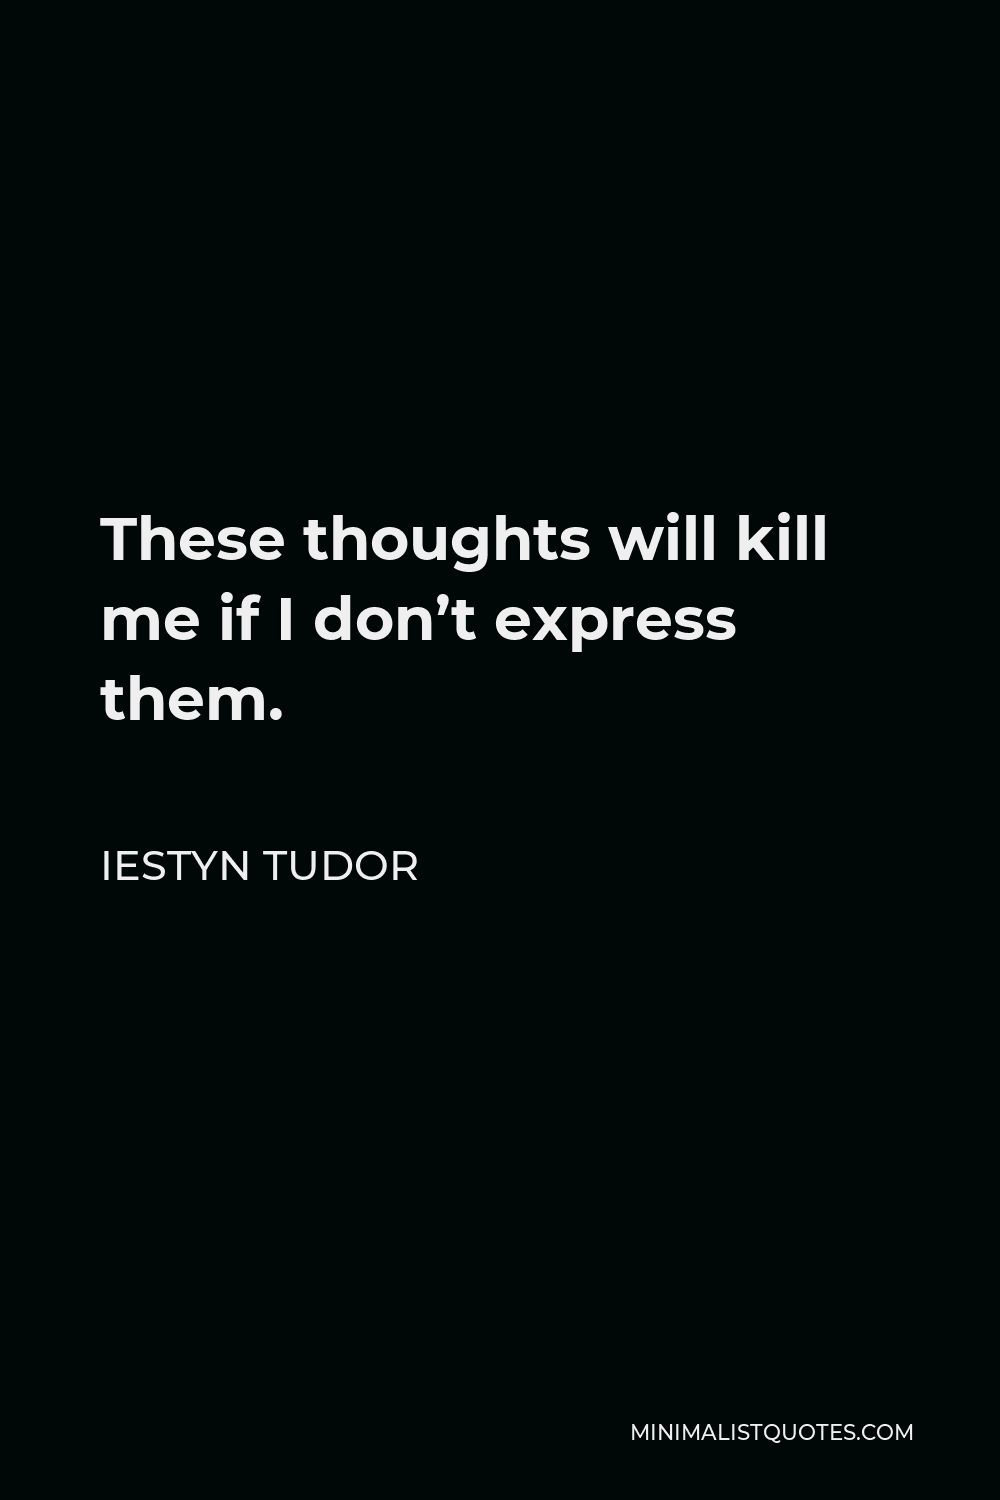 Iestyn Tudor Quote - These thoughts will kill me if I don’t express them.